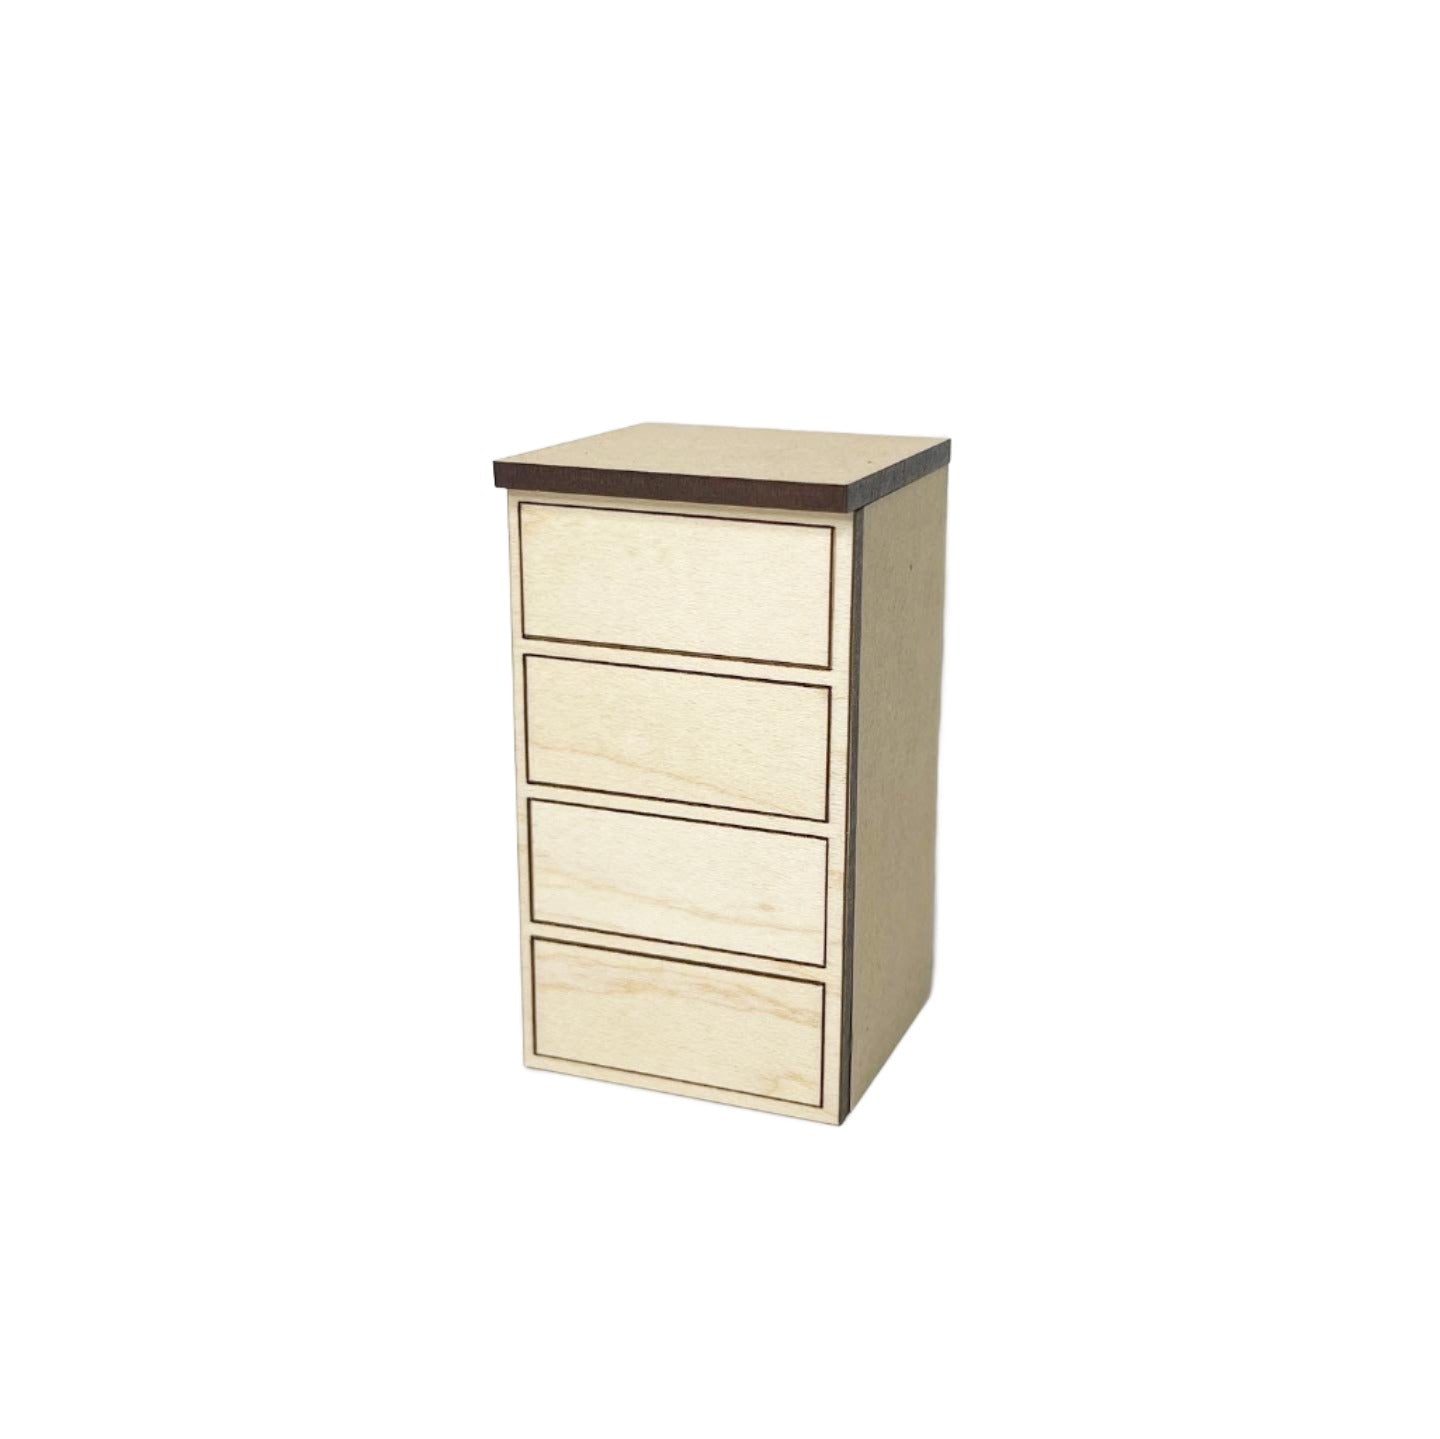 Single Lower Cabinet with 4 Drawers, Standard